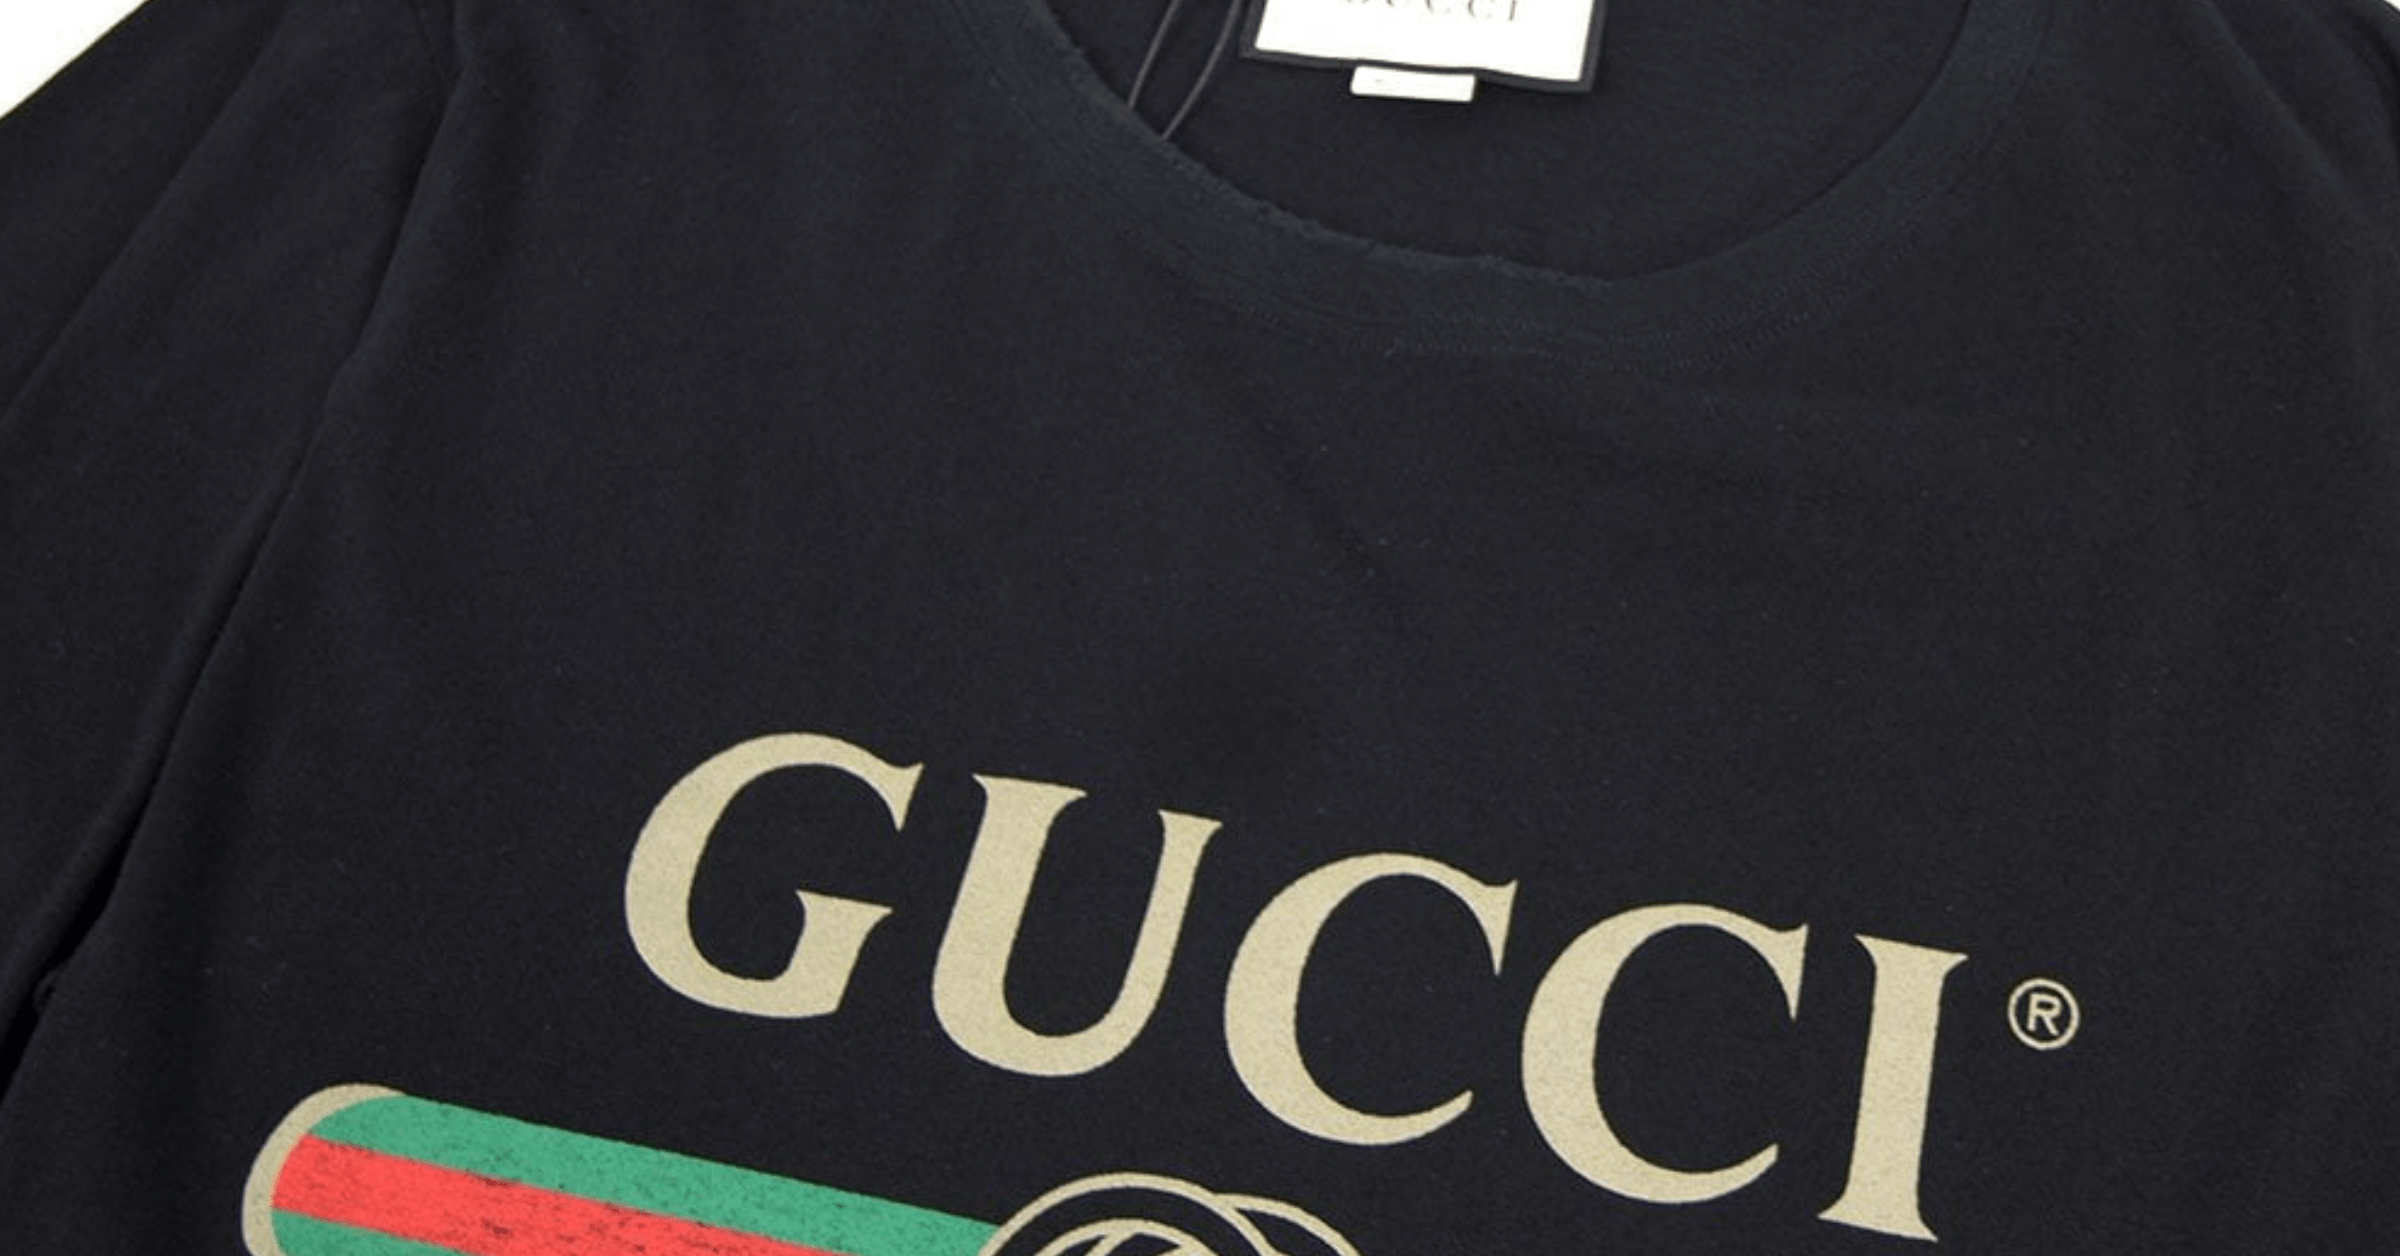 How To Spot Fake Gucci T-Shirt